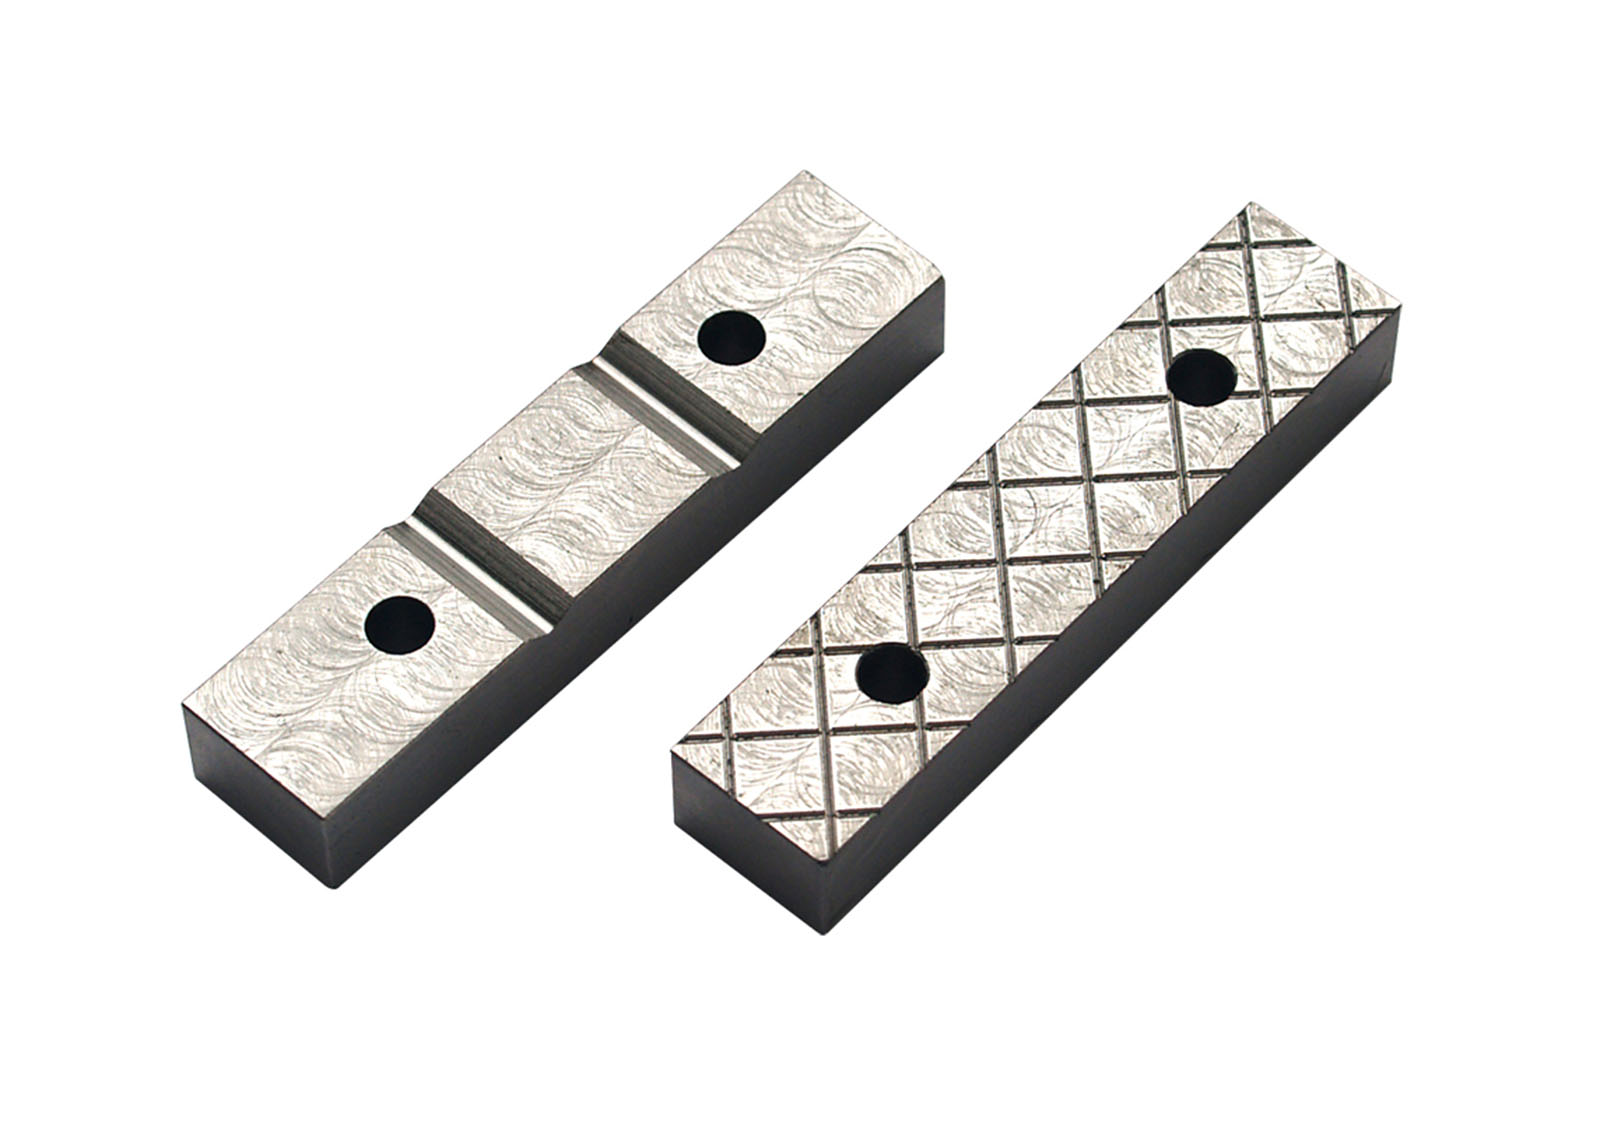 3-Jaw Universal Vise ( 1 metal jaw plate + 2 plastic jaw plates) - Modify Airsoft Accessories